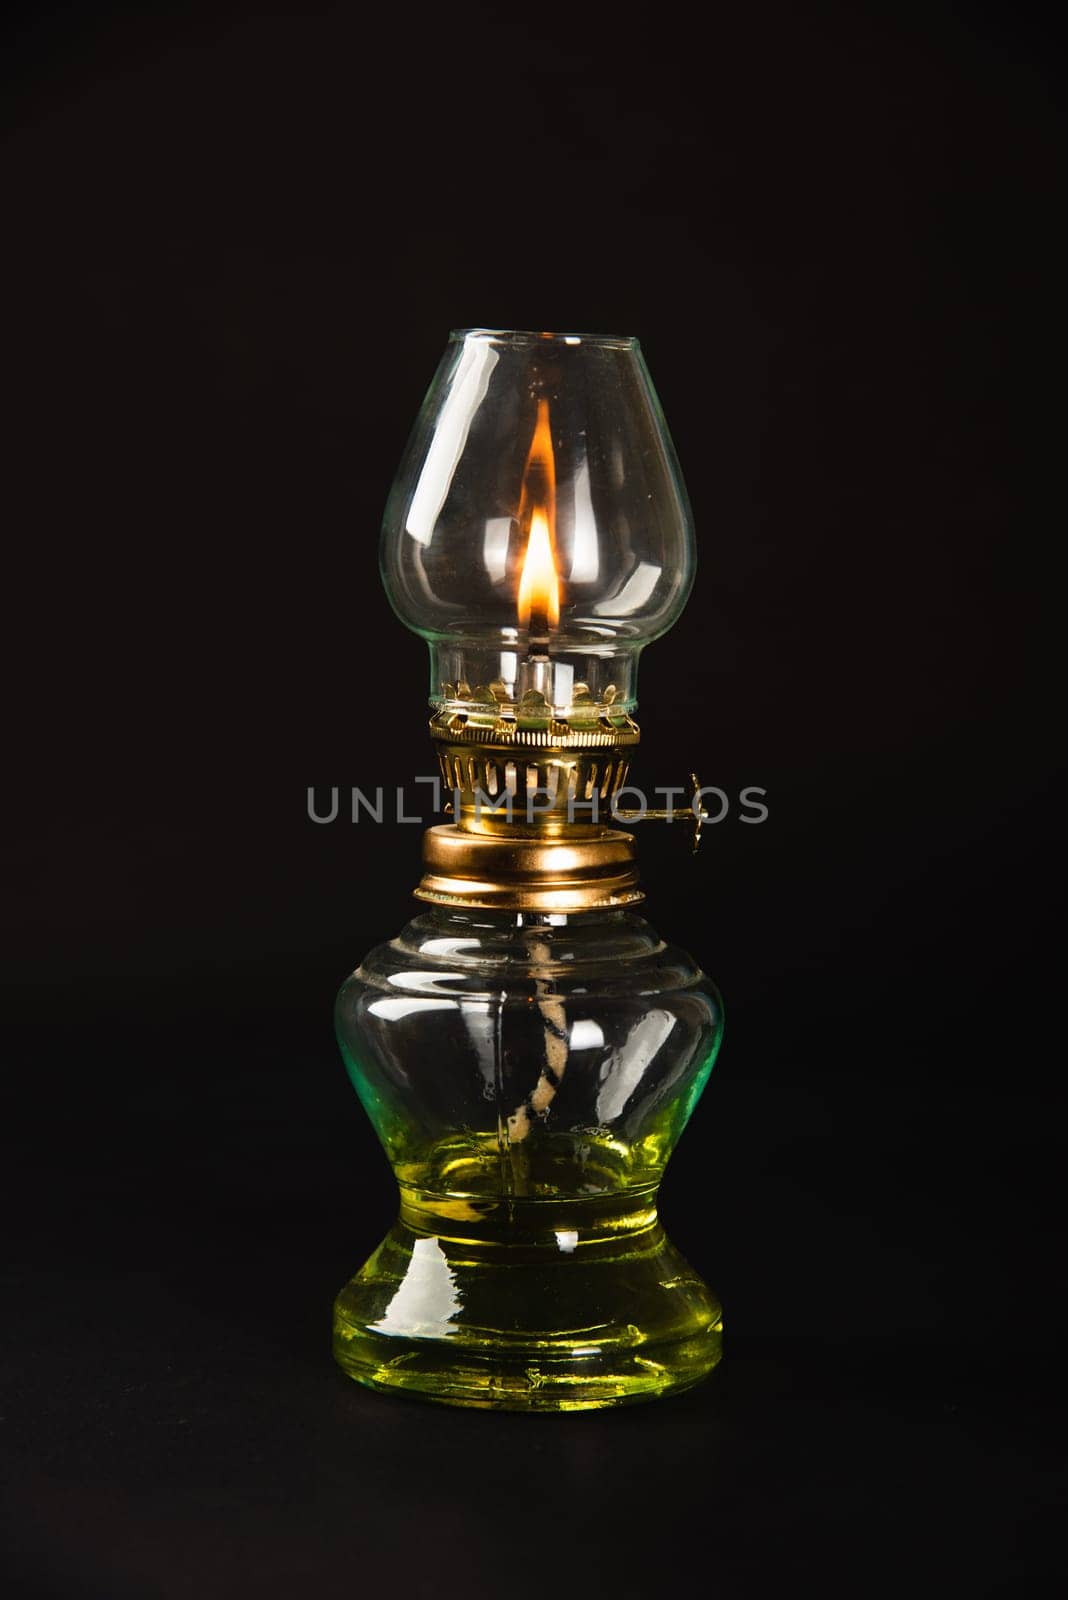 An antique oil lamp, symbolizing Diwali's essence, illuminated against a dark background. Perfect for conveying festive greetings and vintage aesthetics. by Sorapop